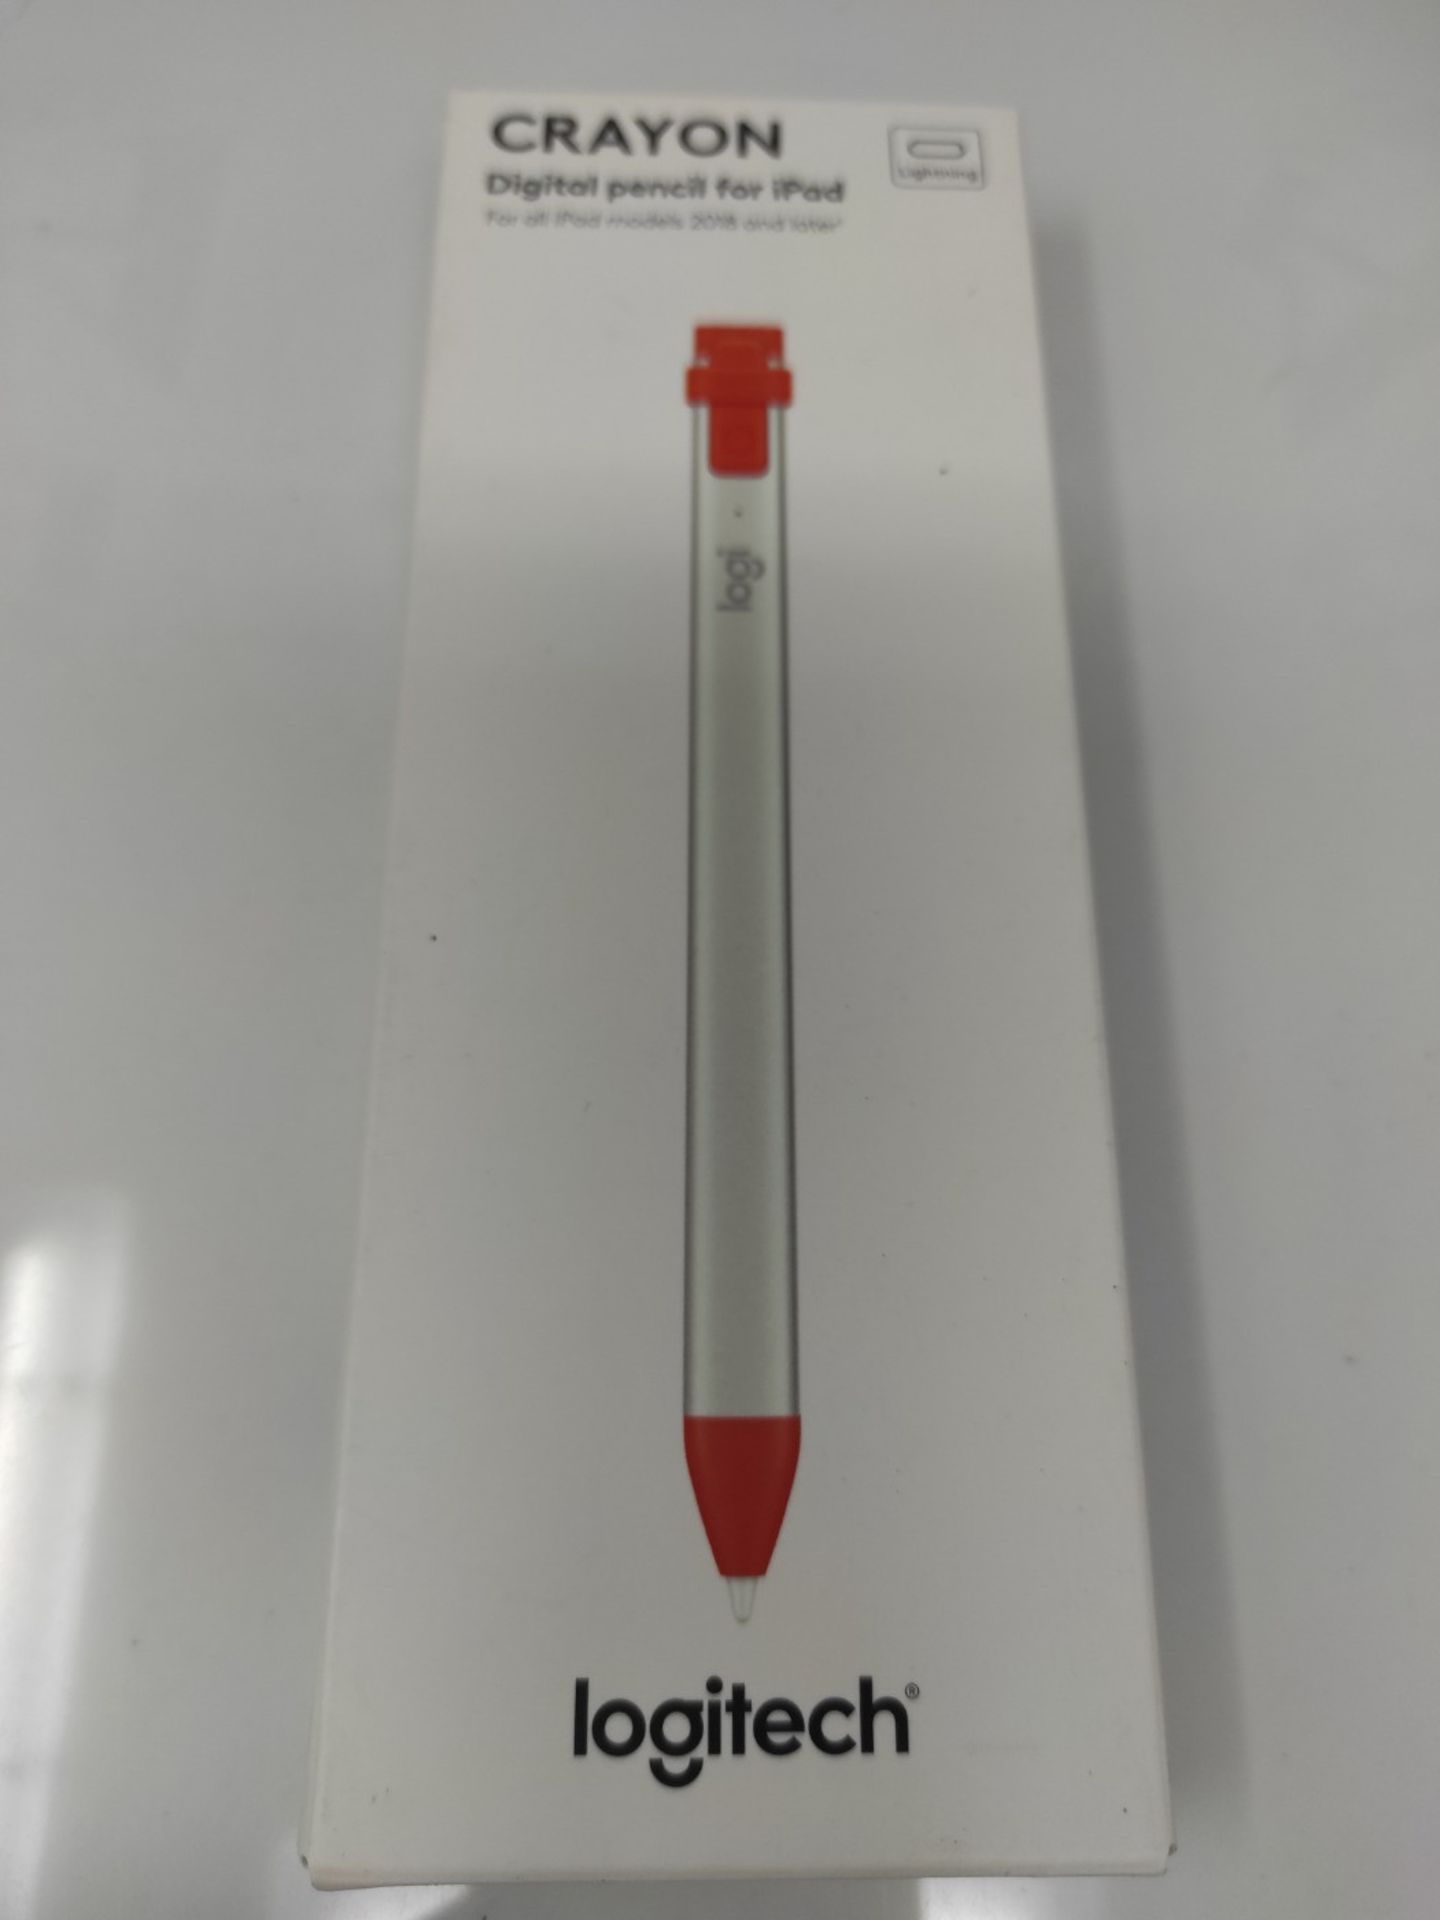 Logitech Crayon digital drawing pen for all iPads released from 2018 onwards with Appl - Image 2 of 3